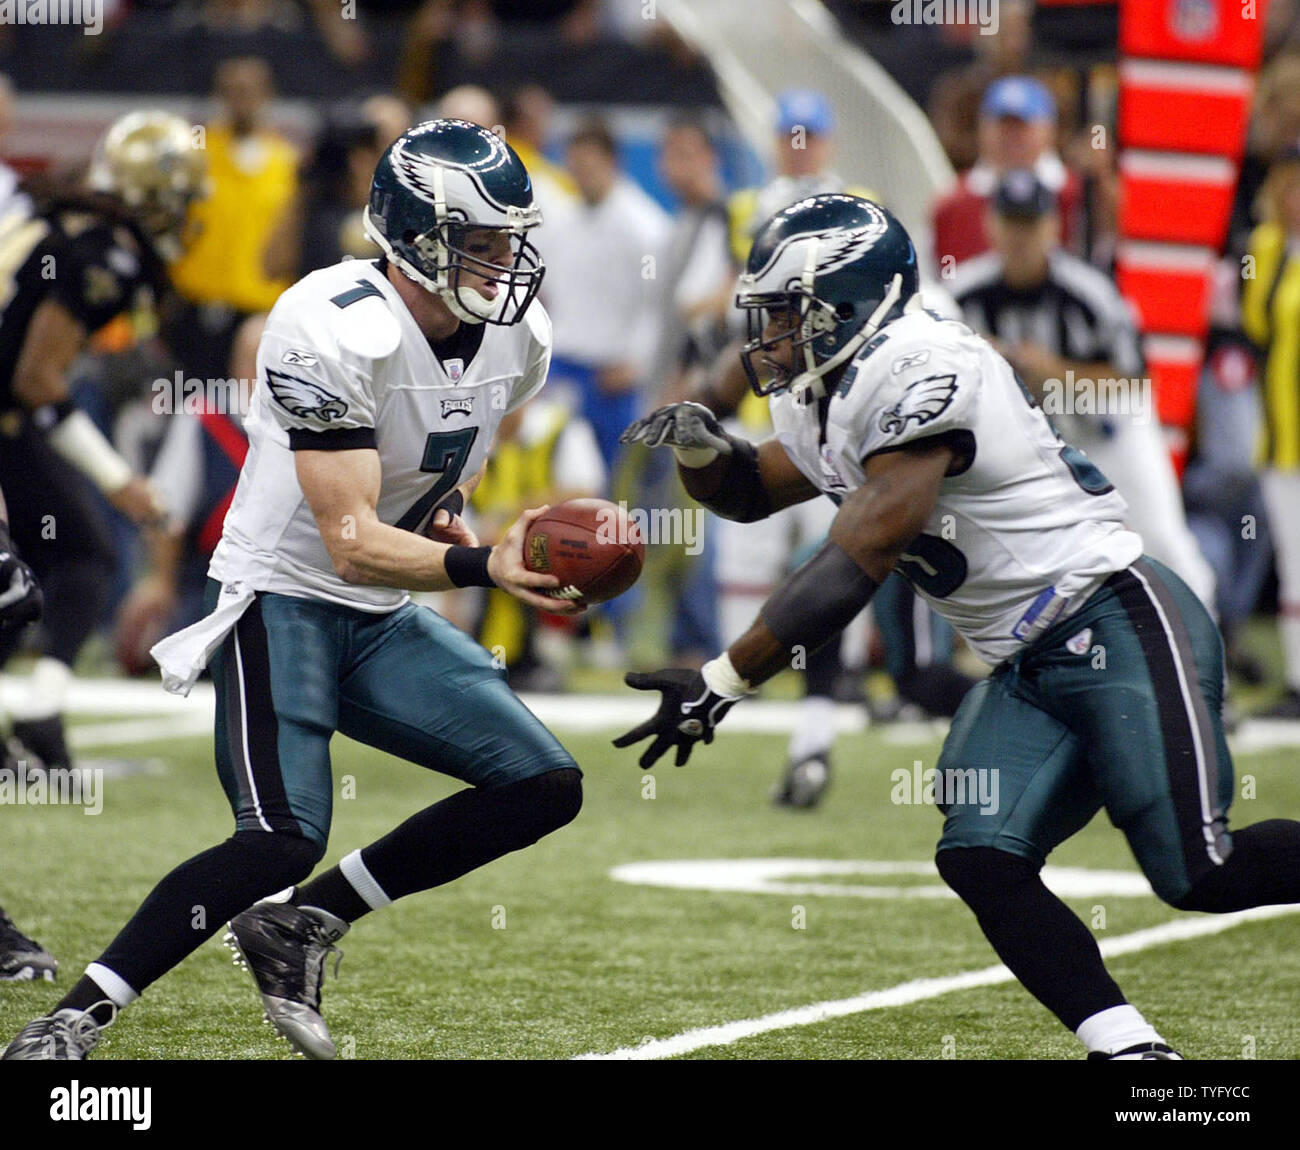 Philadelphia Eagles quarterback Jeff Garcia hands off to Brian Dawkins in the first quarter against the New Orleans Saints during the NFC divisional playoffs at the Louisiana Superdome in New Orleans on January 13, 2007. Dawkins was stopped for a short gain.  (UPI Photo/A.J. Sisco) Stock Photo